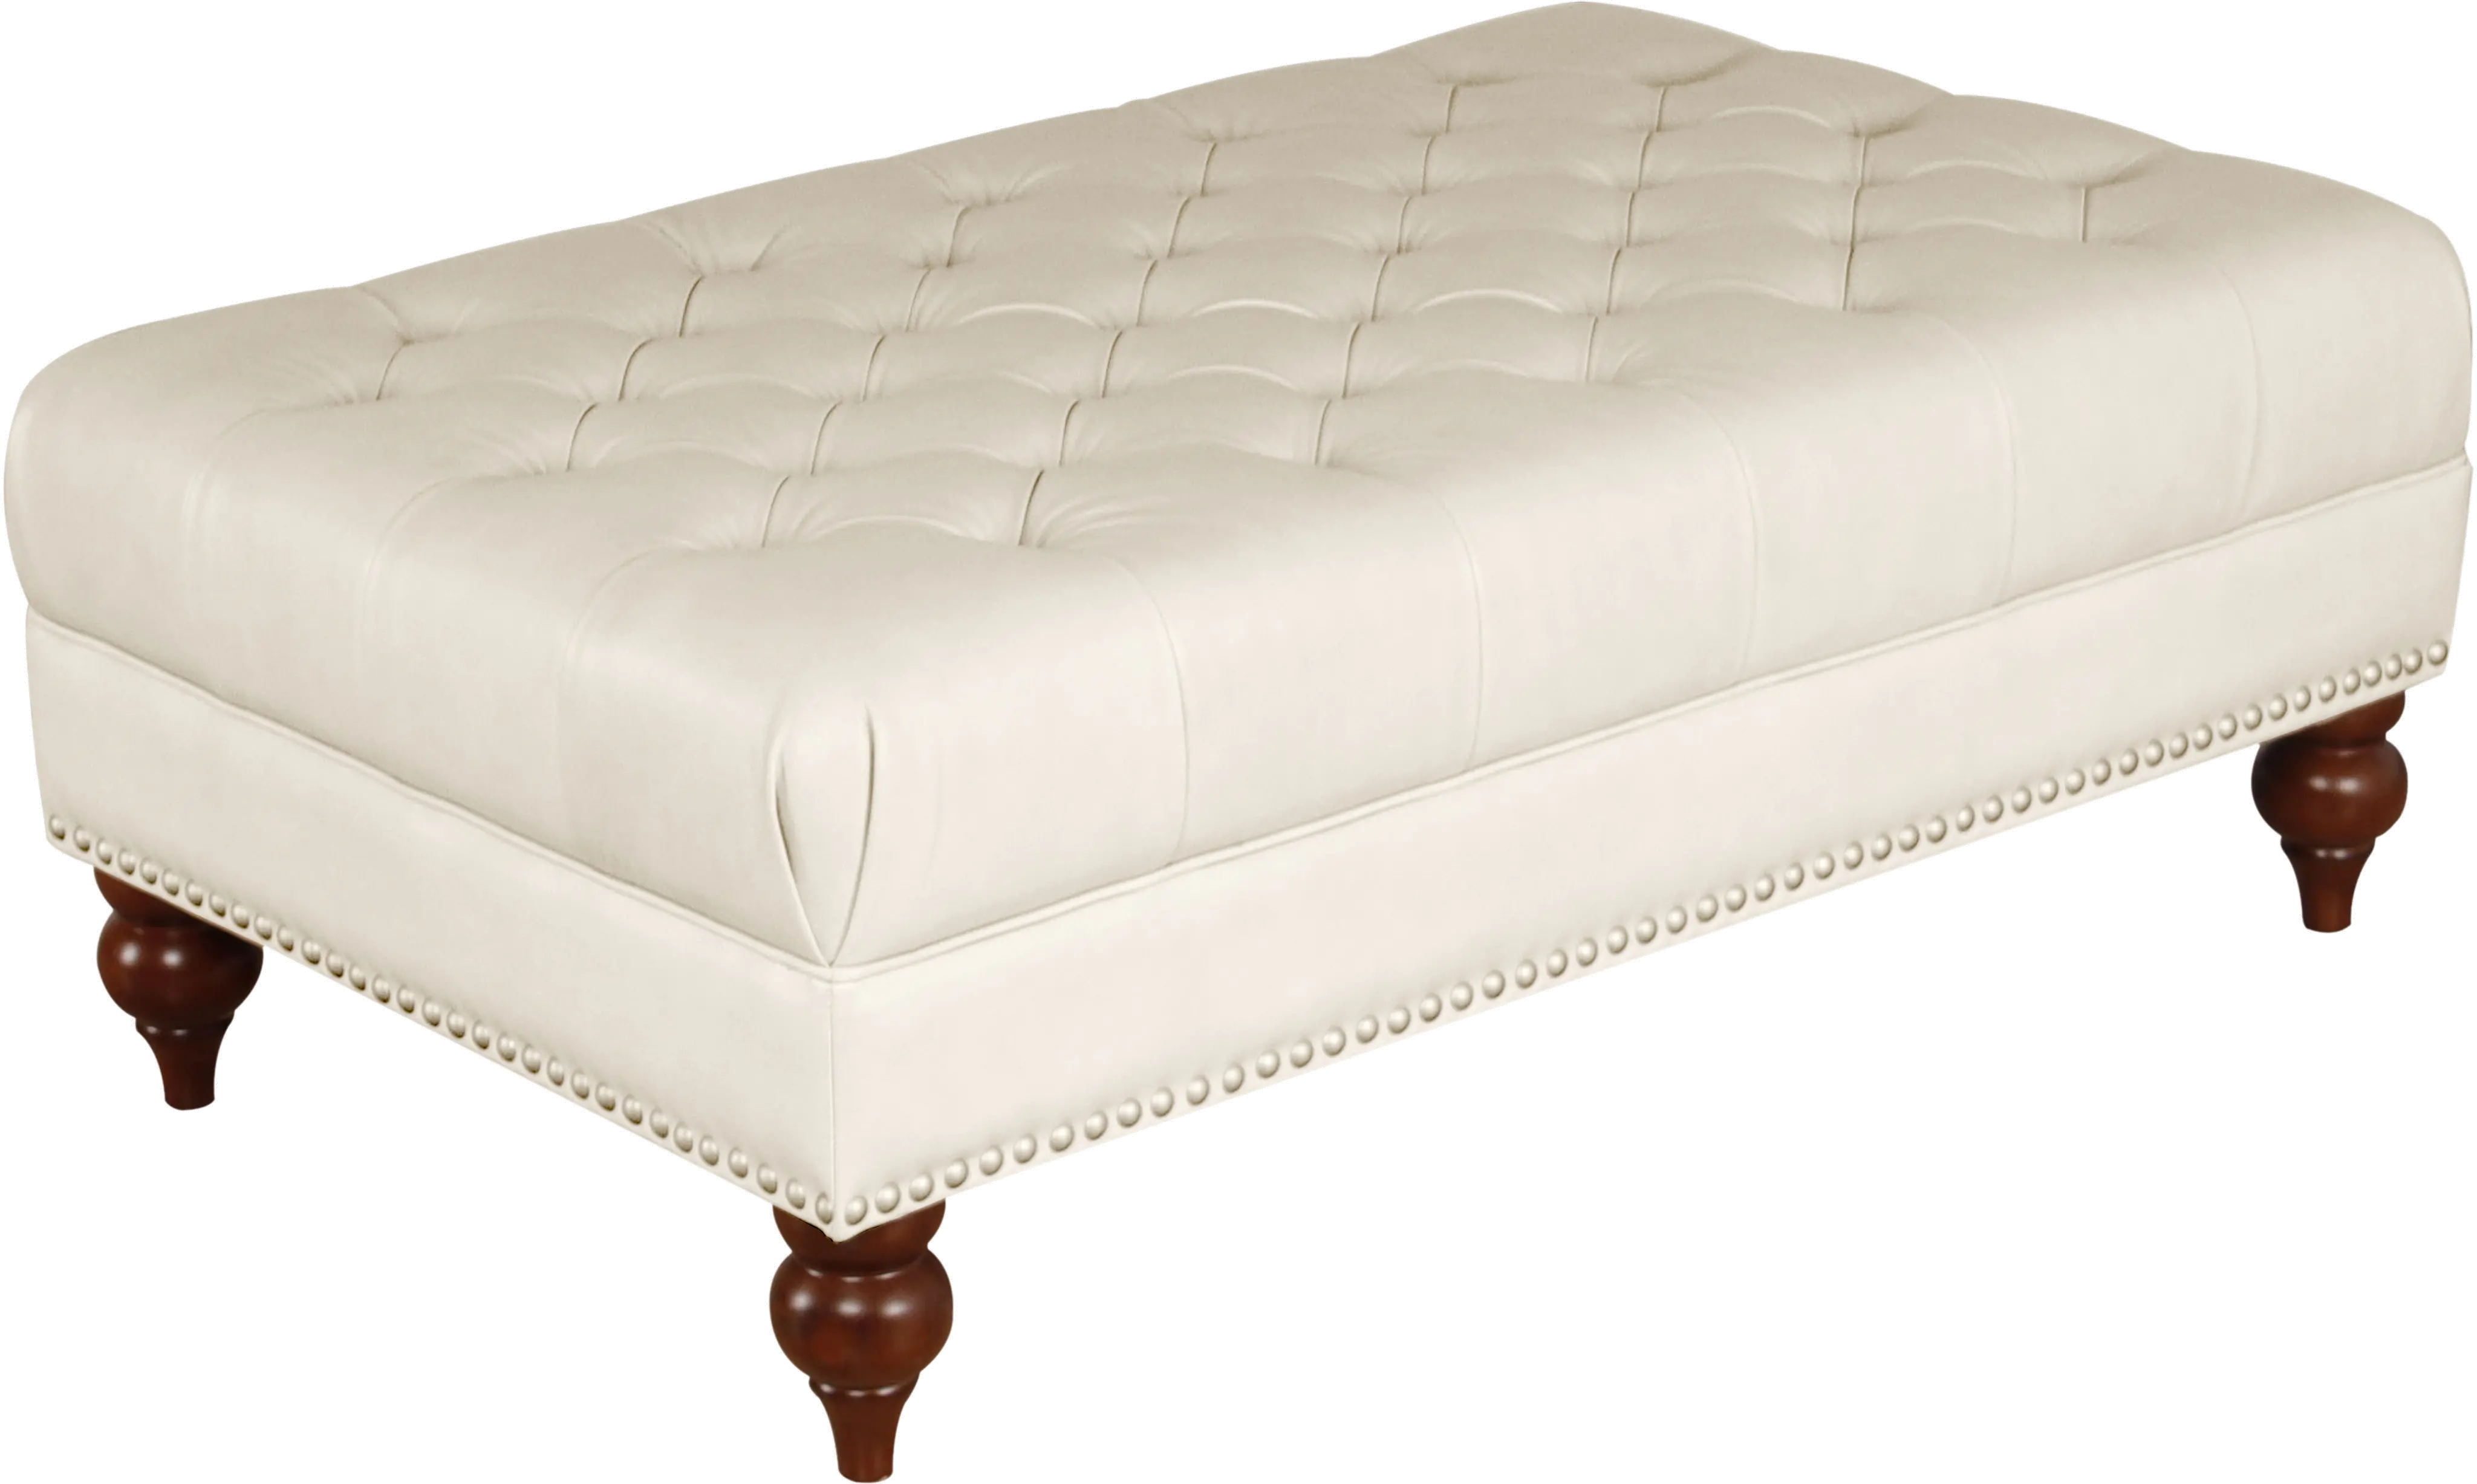 9818-00-2175 Kennedy White Leather Ottoman - Amax Leather sku 9818-00-2175